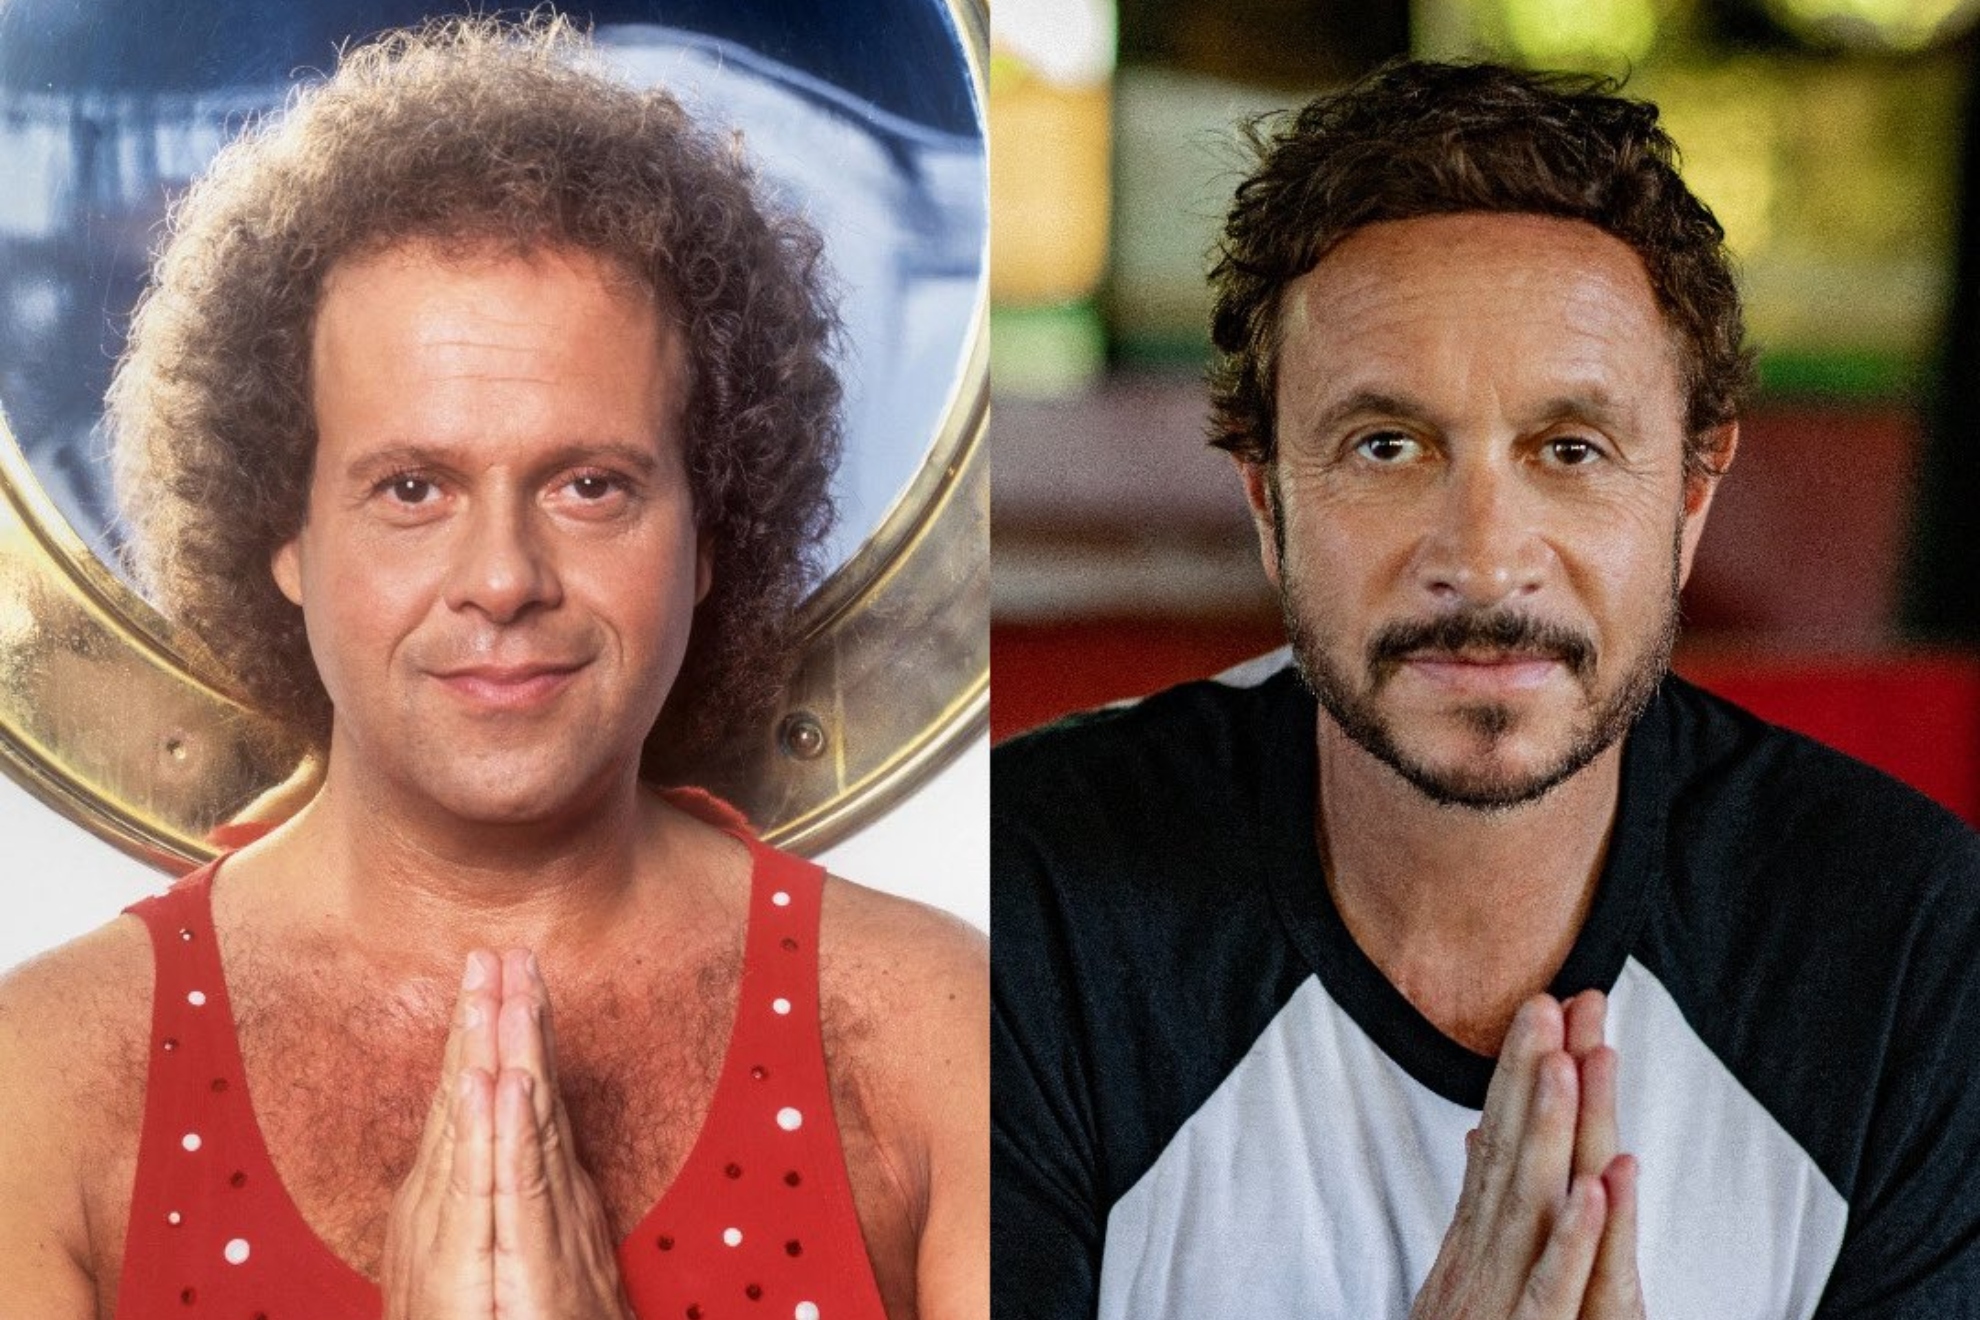 Pauly Shore seeks big Hollywood comeback with role he was "meant to play"